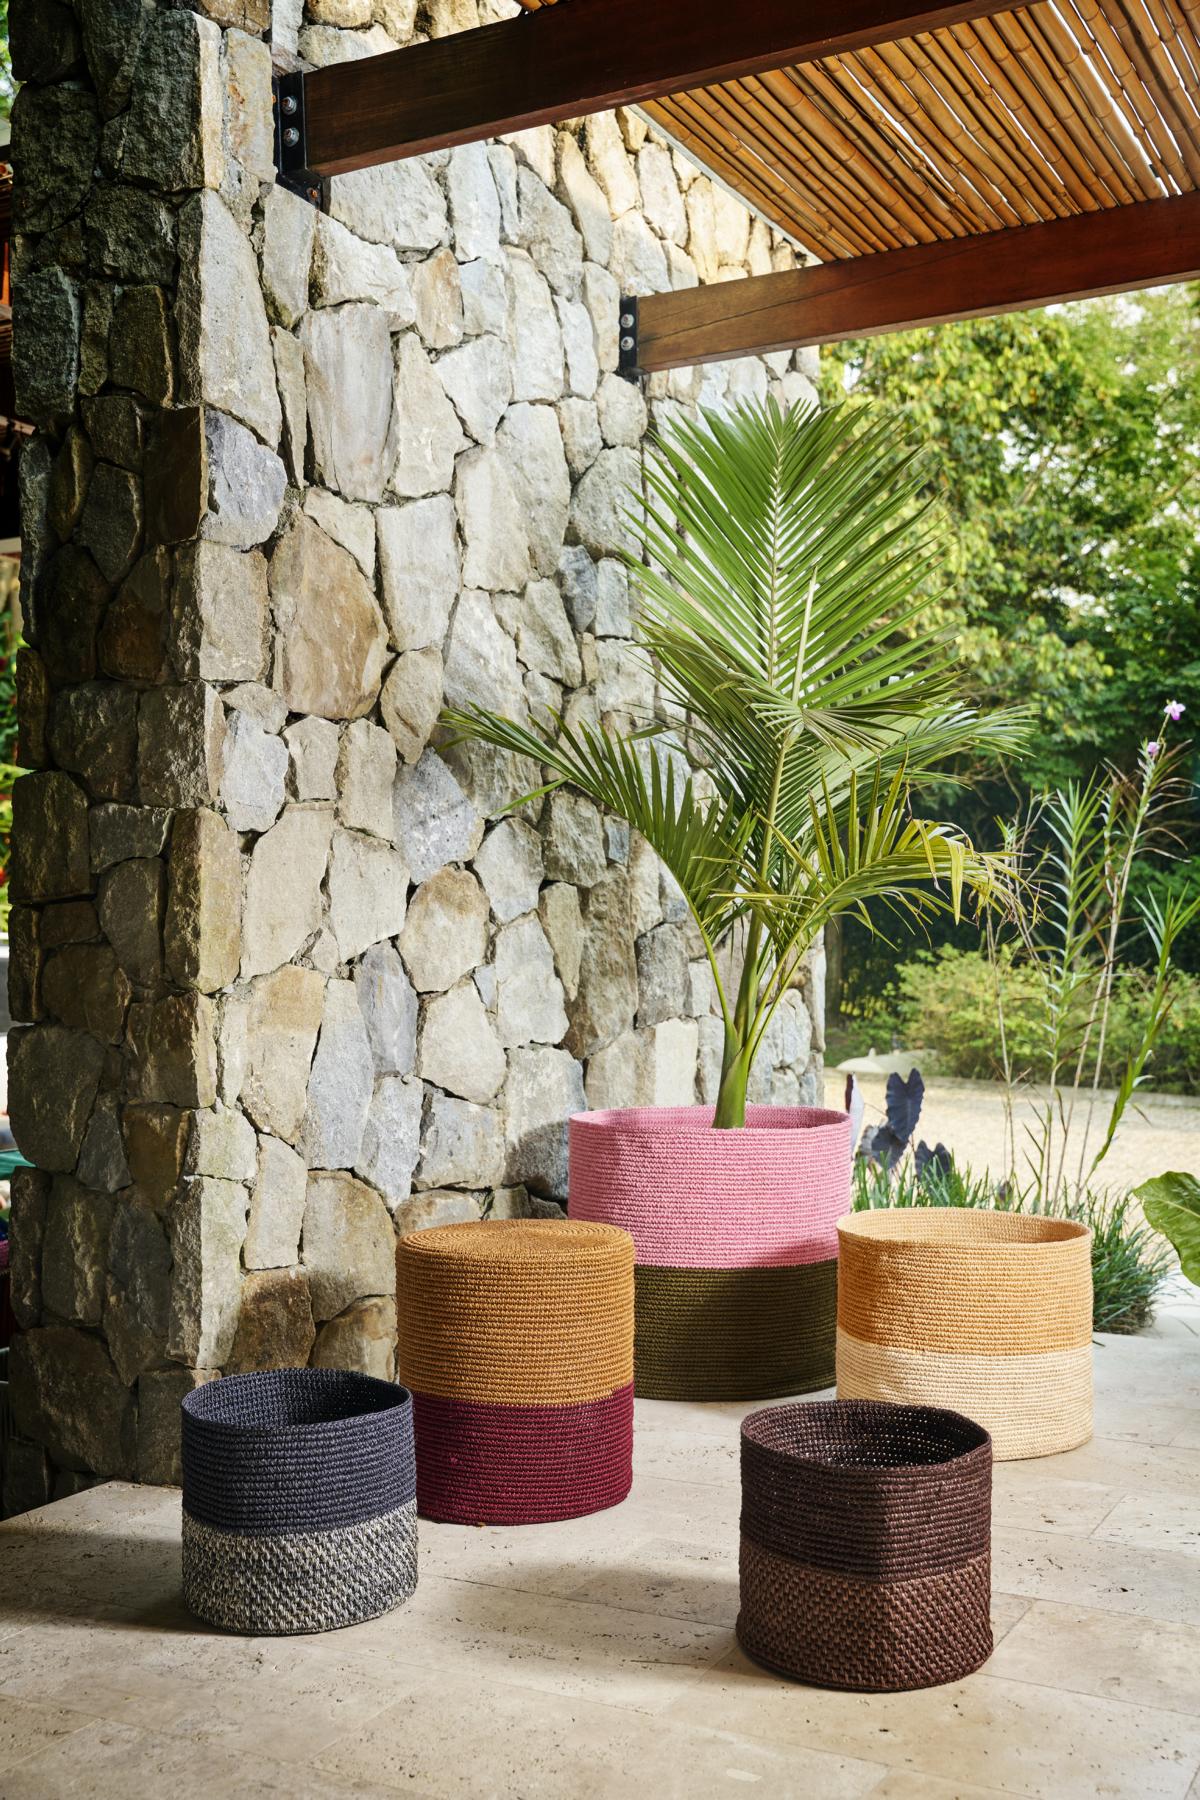 Chiscas Planters - small